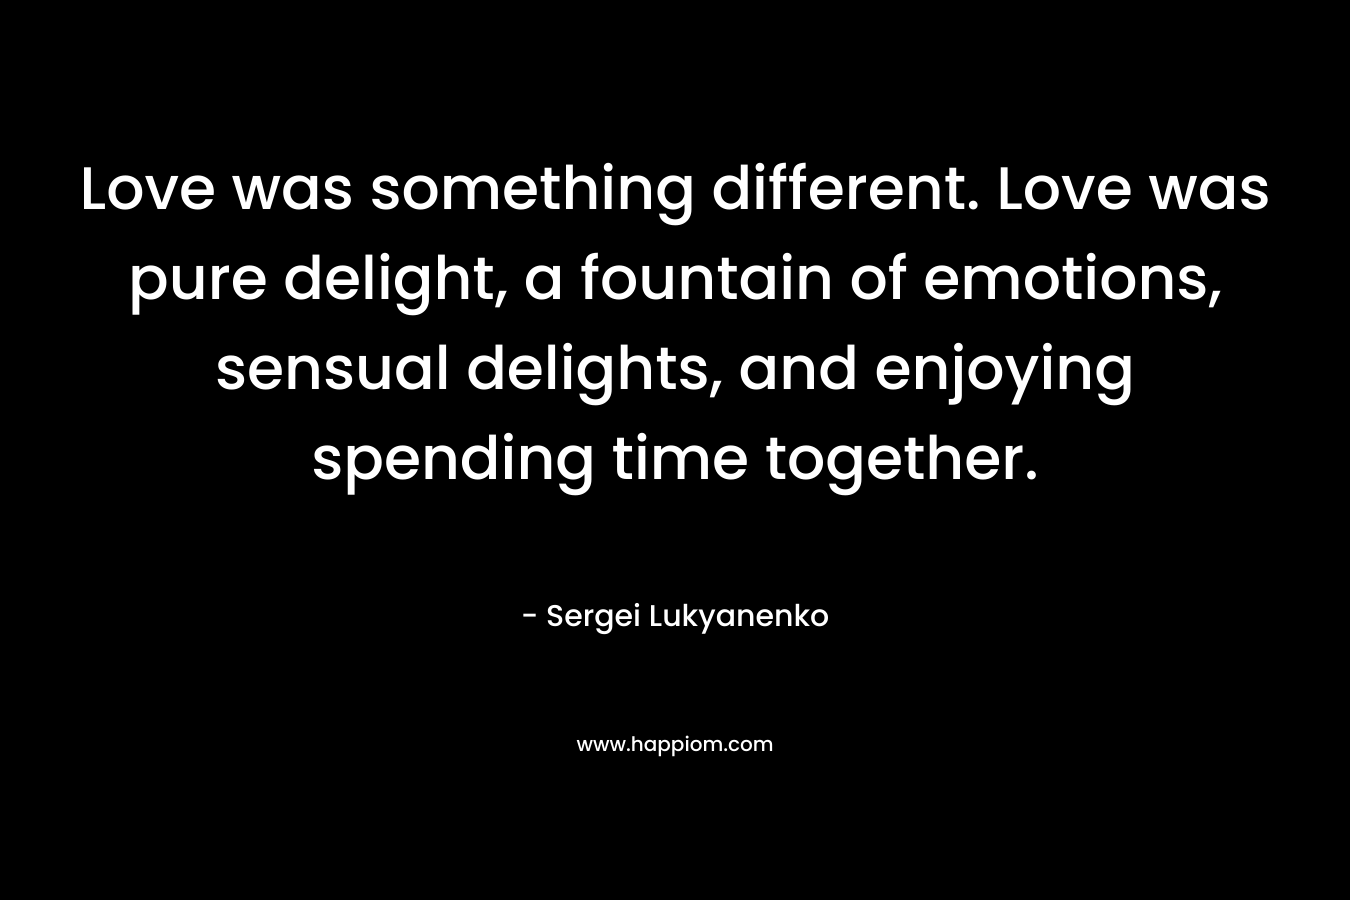 Love was something different. Love was pure delight, a fountain of emotions, sensual delights, and enjoying spending time together. – Sergei Lukyanenko